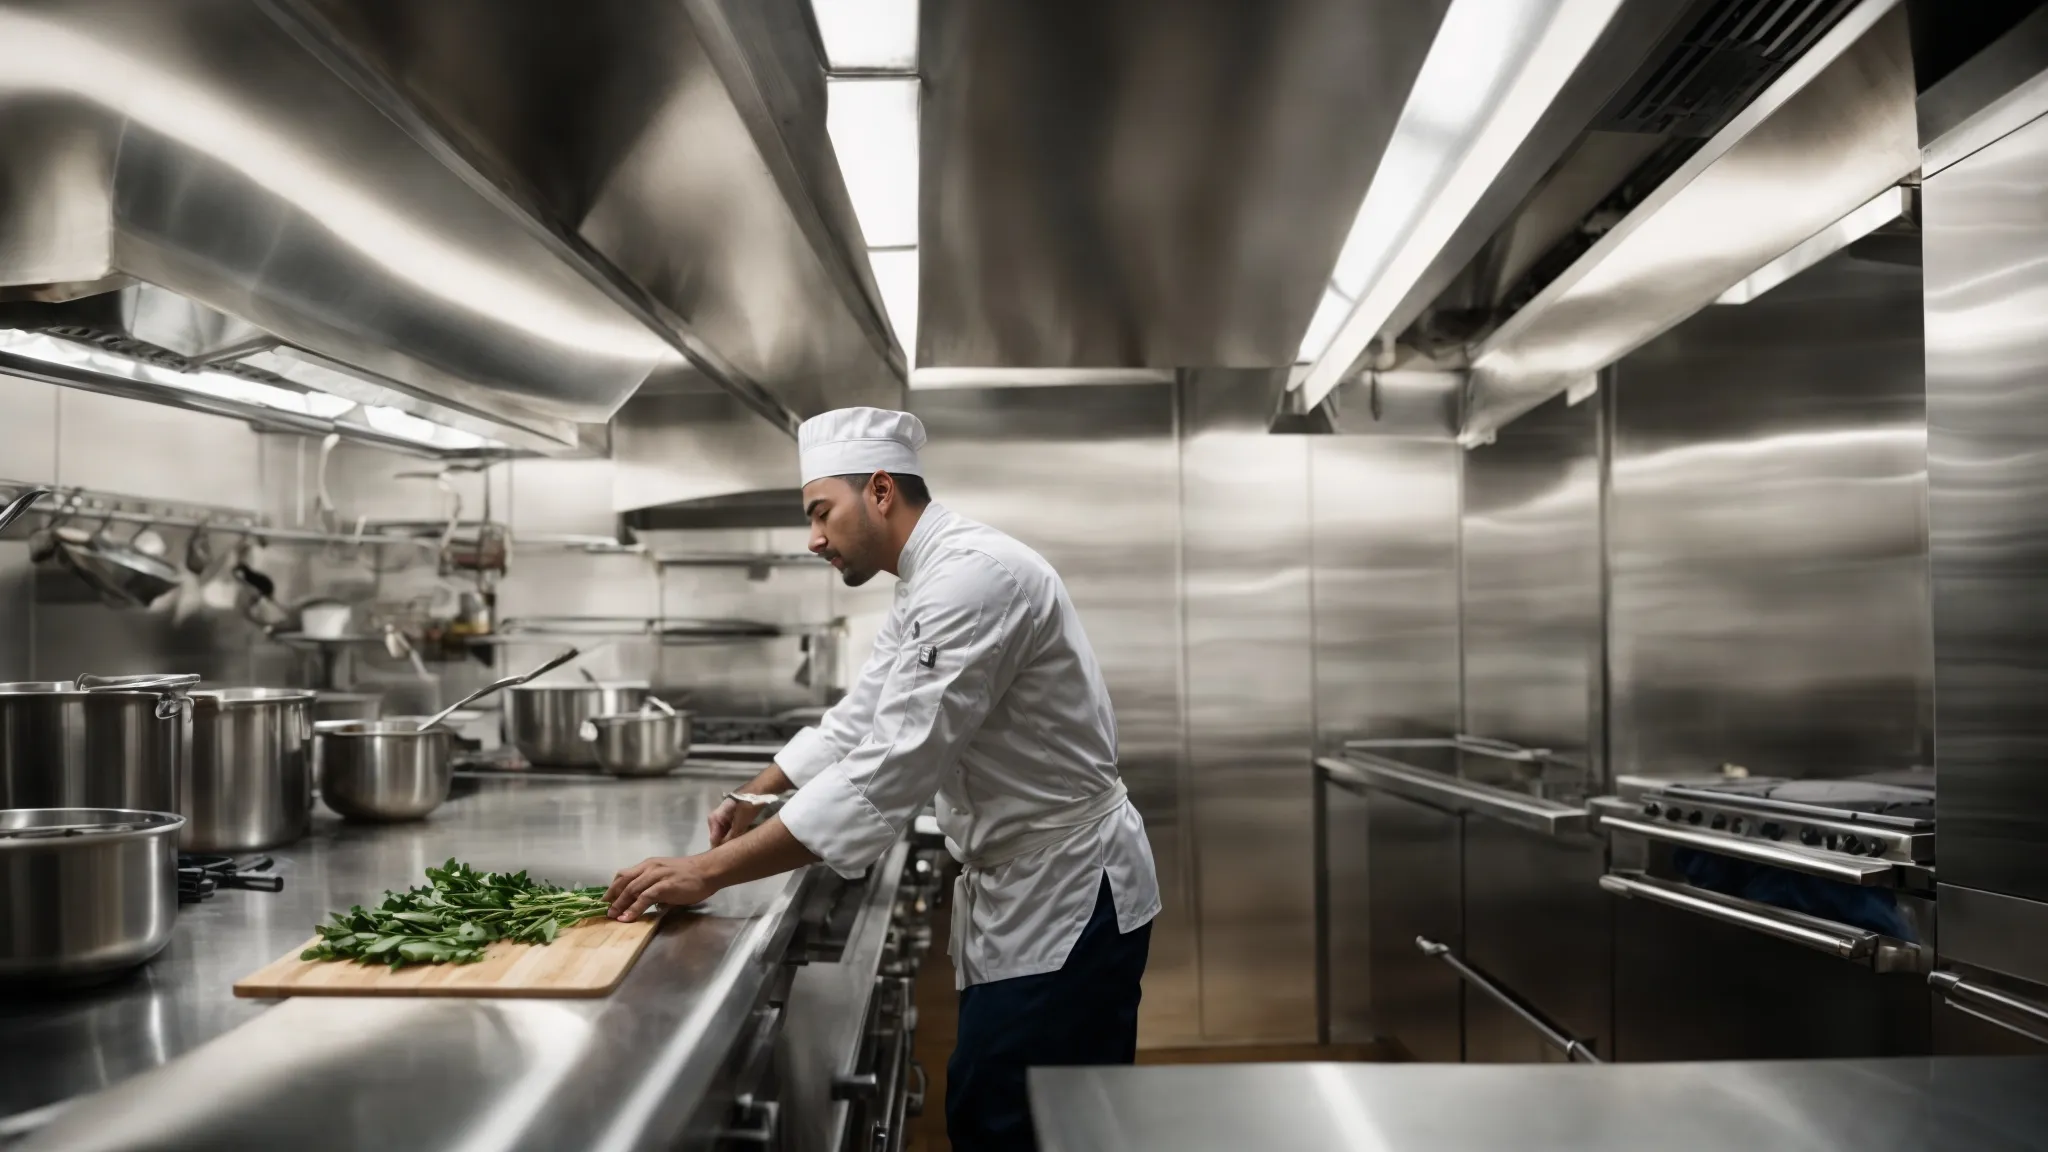 amid the gleam of stainless steel, a chef purposefully wipes down the shining surface of a Toronto Hood Cleaning, embodying the essence of diligence and cleanliness.